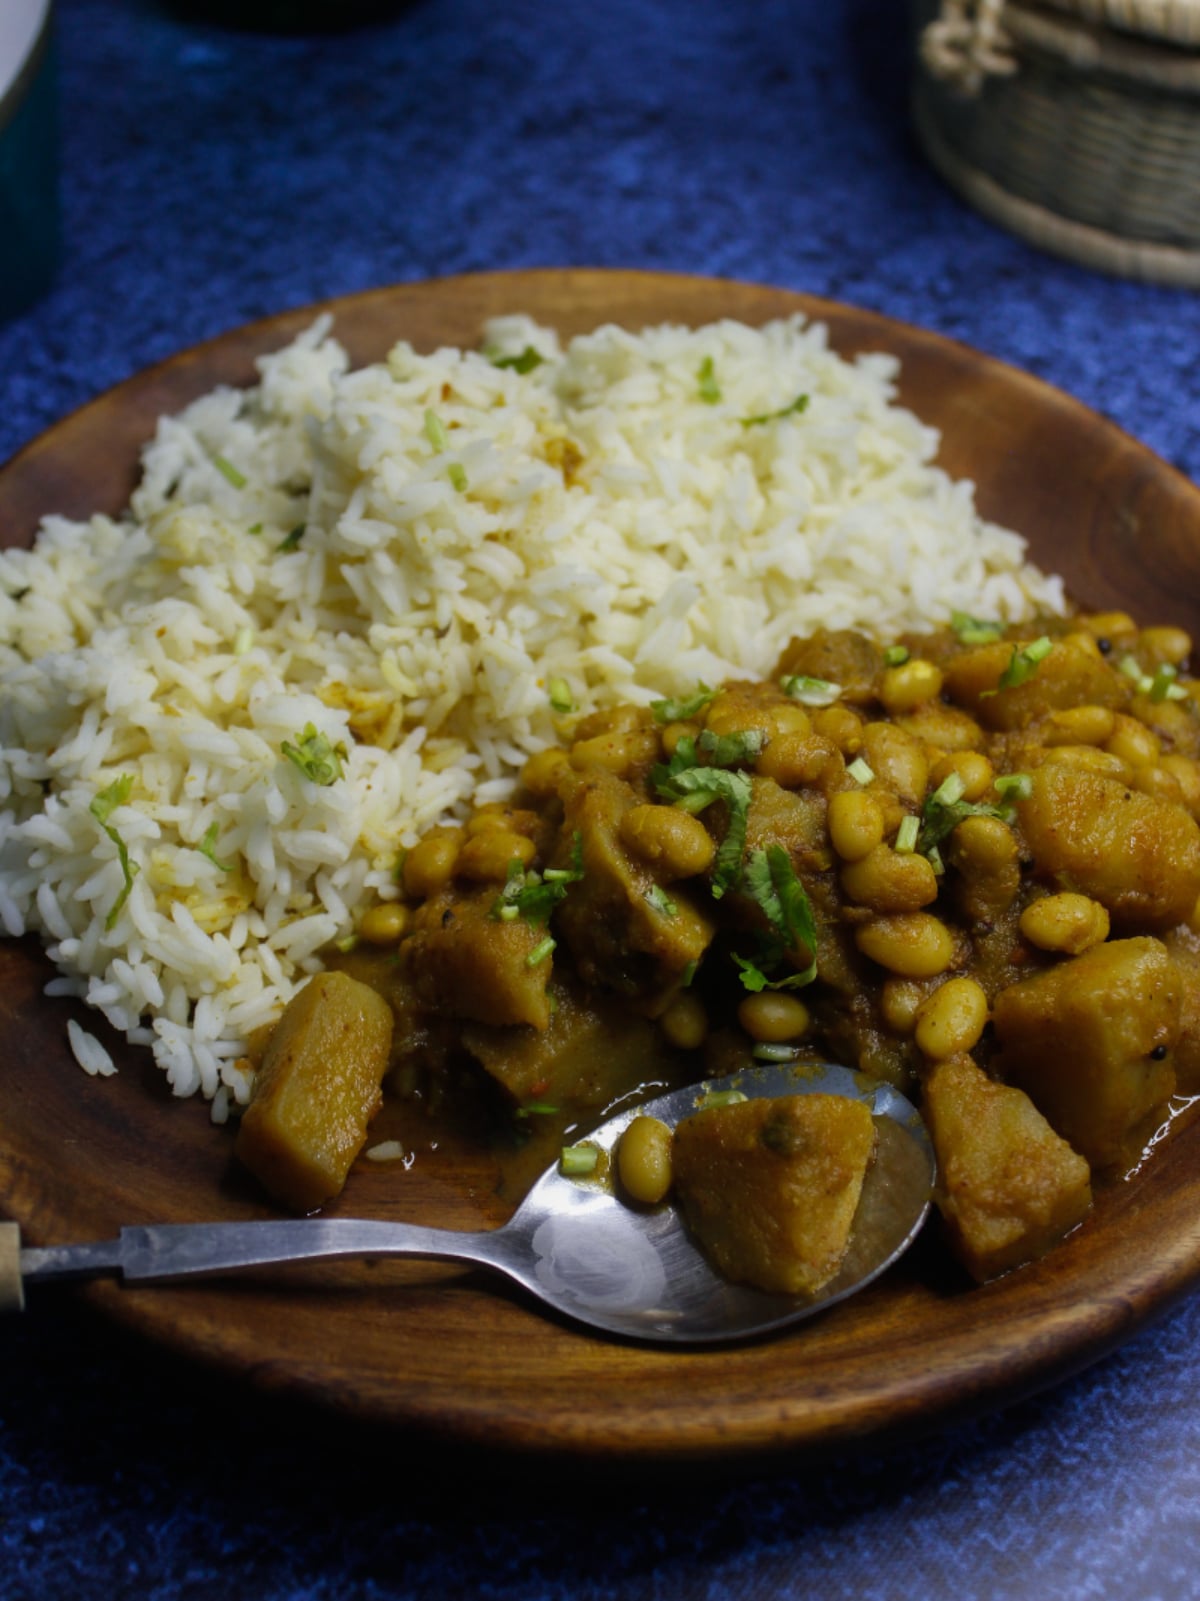 Serve hot Black-Eyed Pea Curry with rice